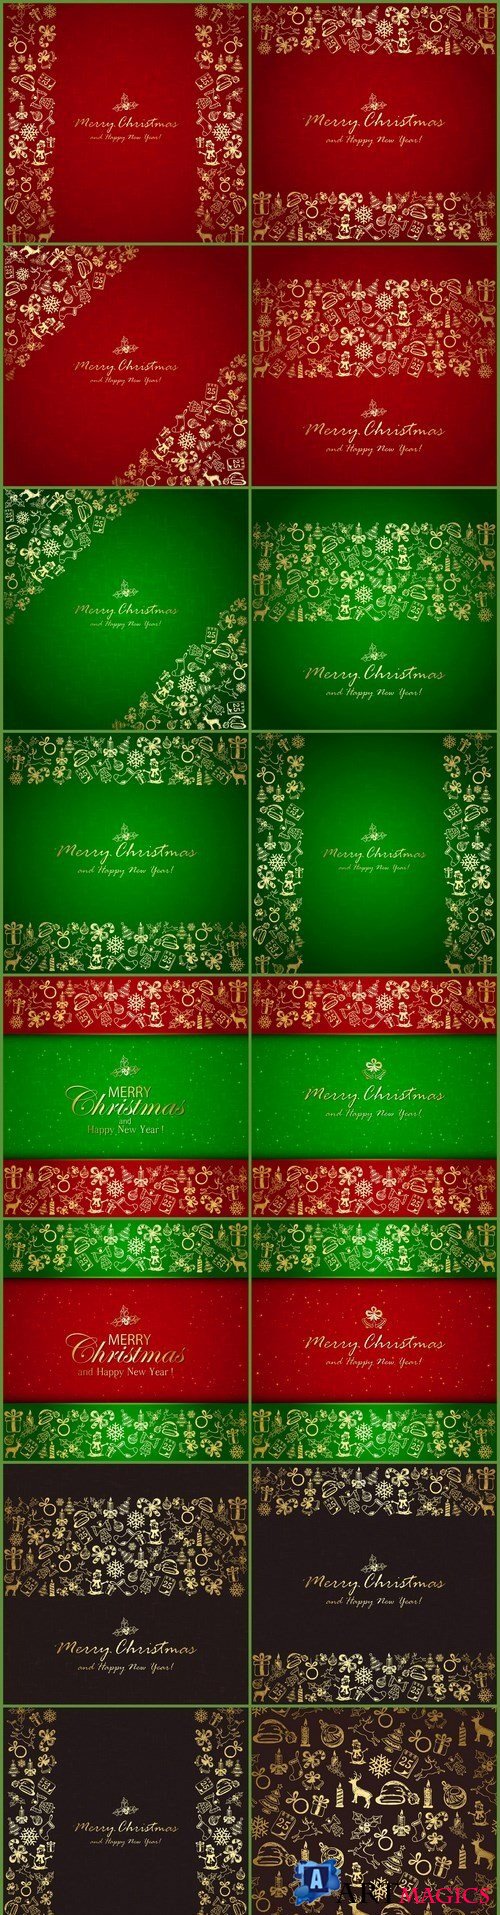 Golden Christmas elements and backgrounds - 16xEPS